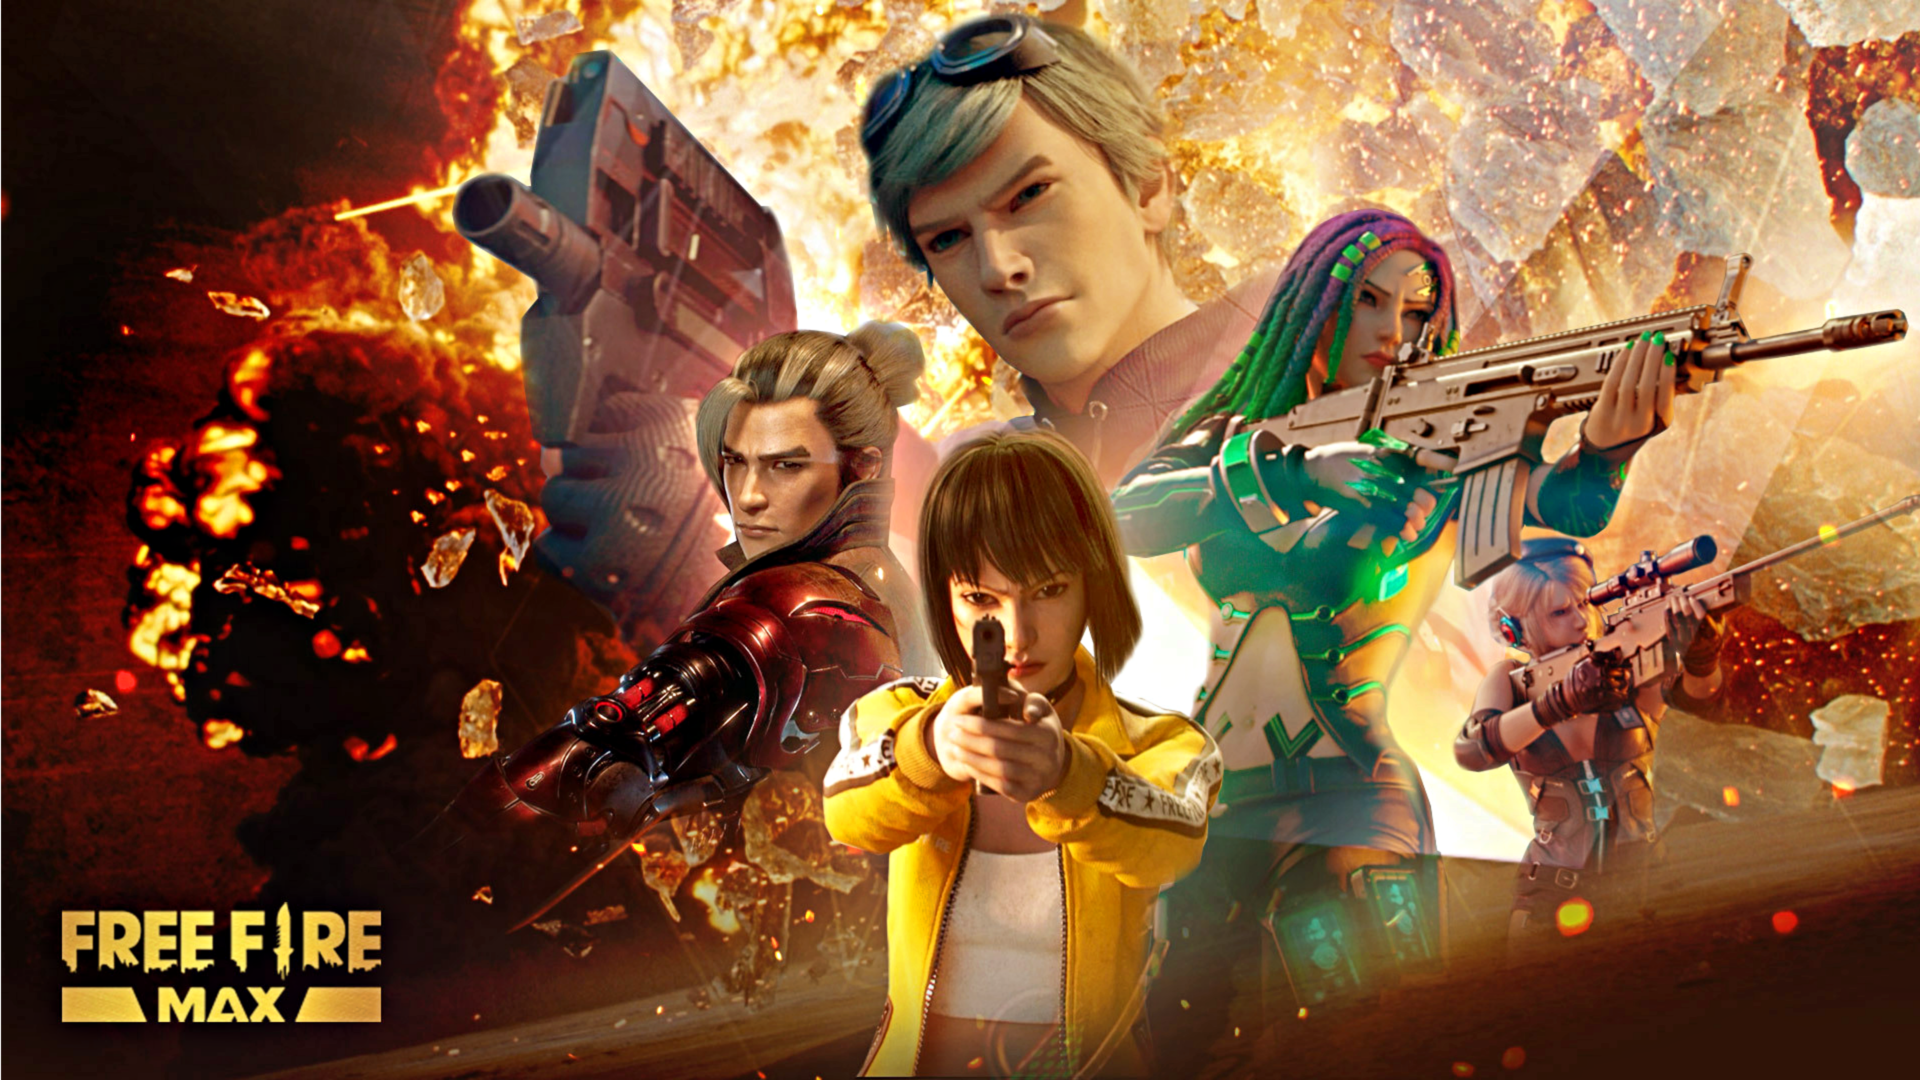 Free Fire MAX codes for June 6: How to redeem